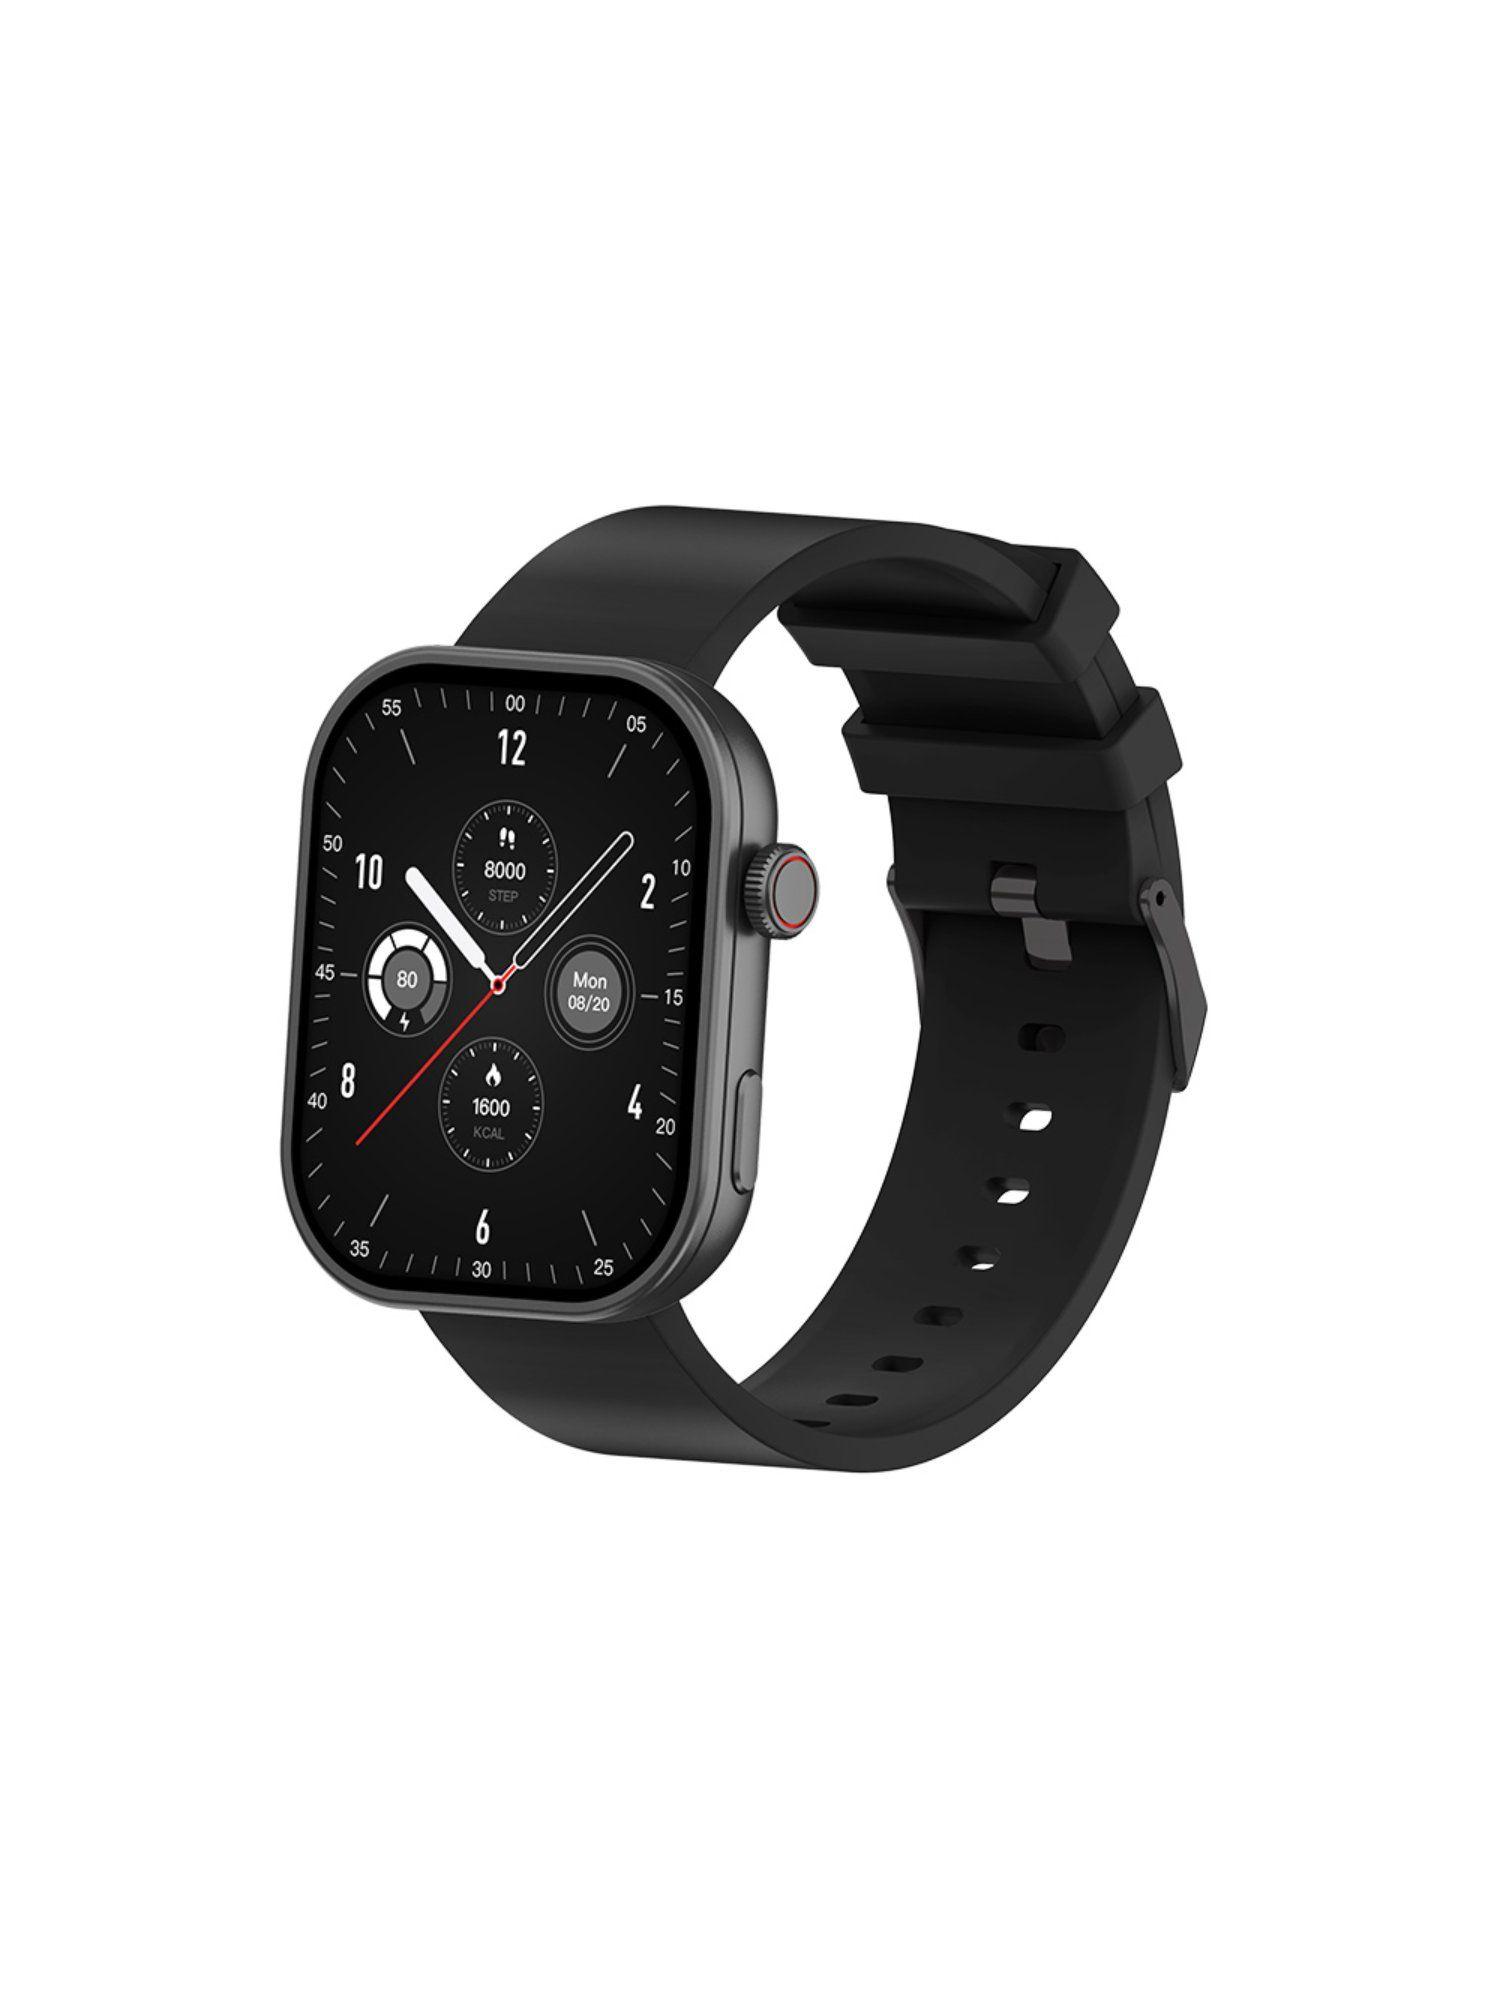 iconnect gen smartwatch|2.01 inch tft display with 240x296 pixel resolution (m)